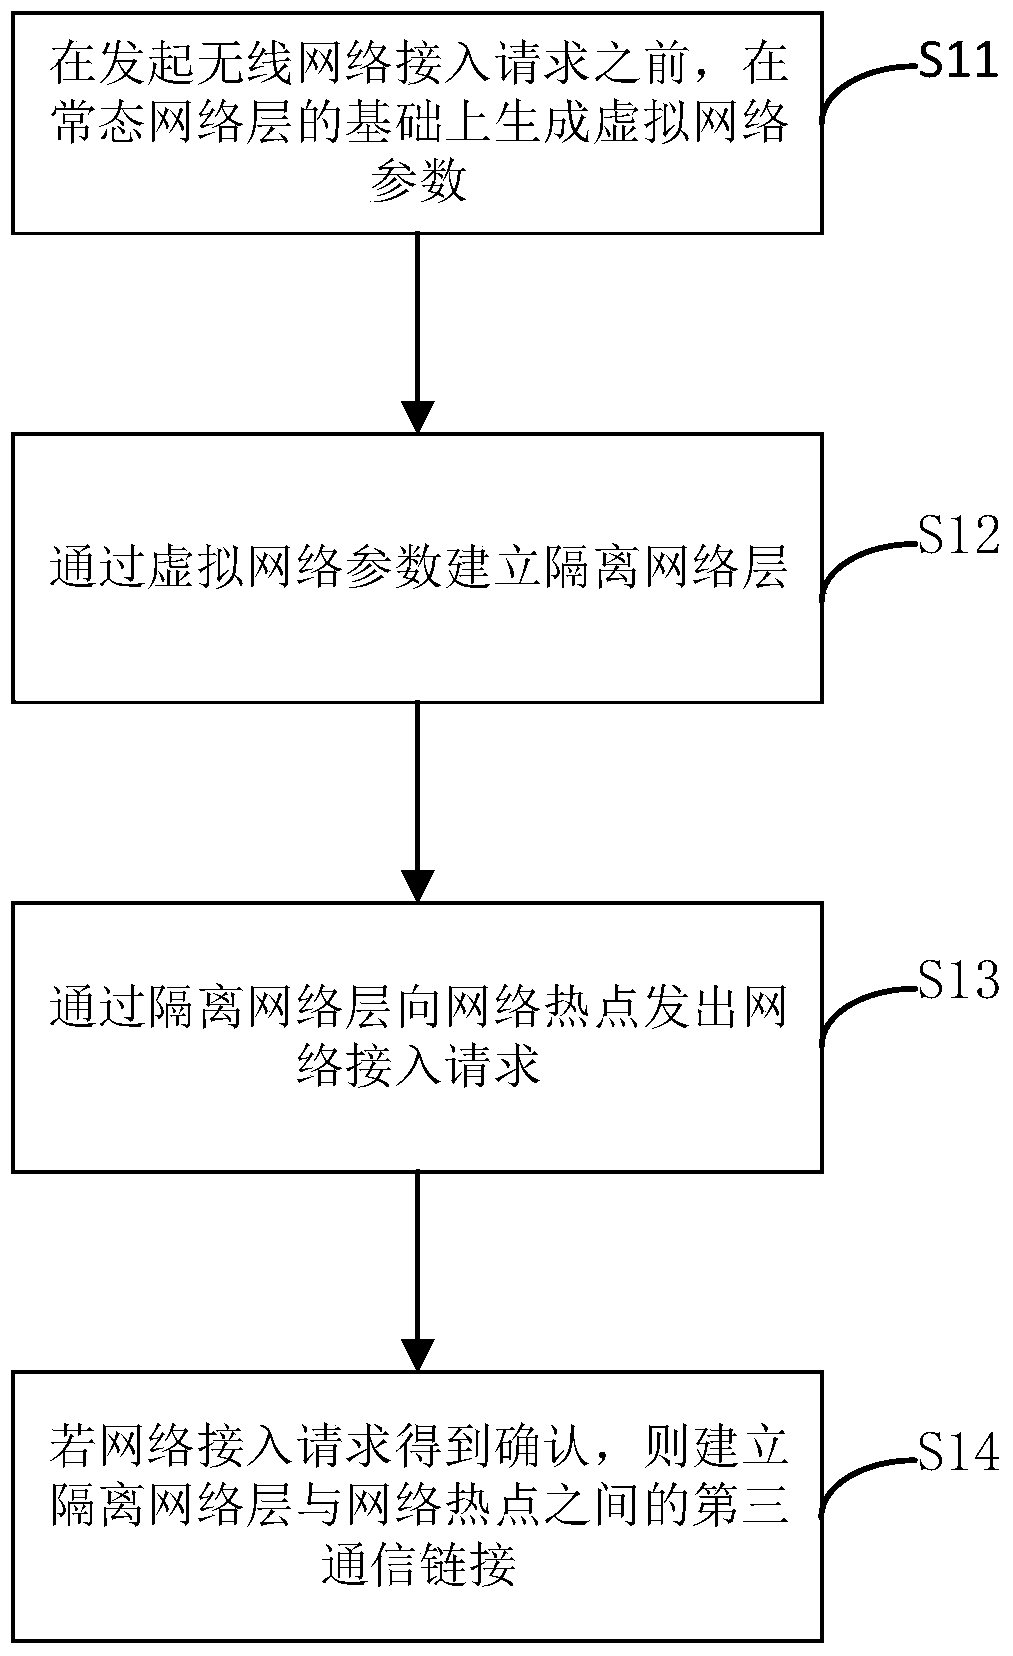 A wireless network security access method, device and terminal